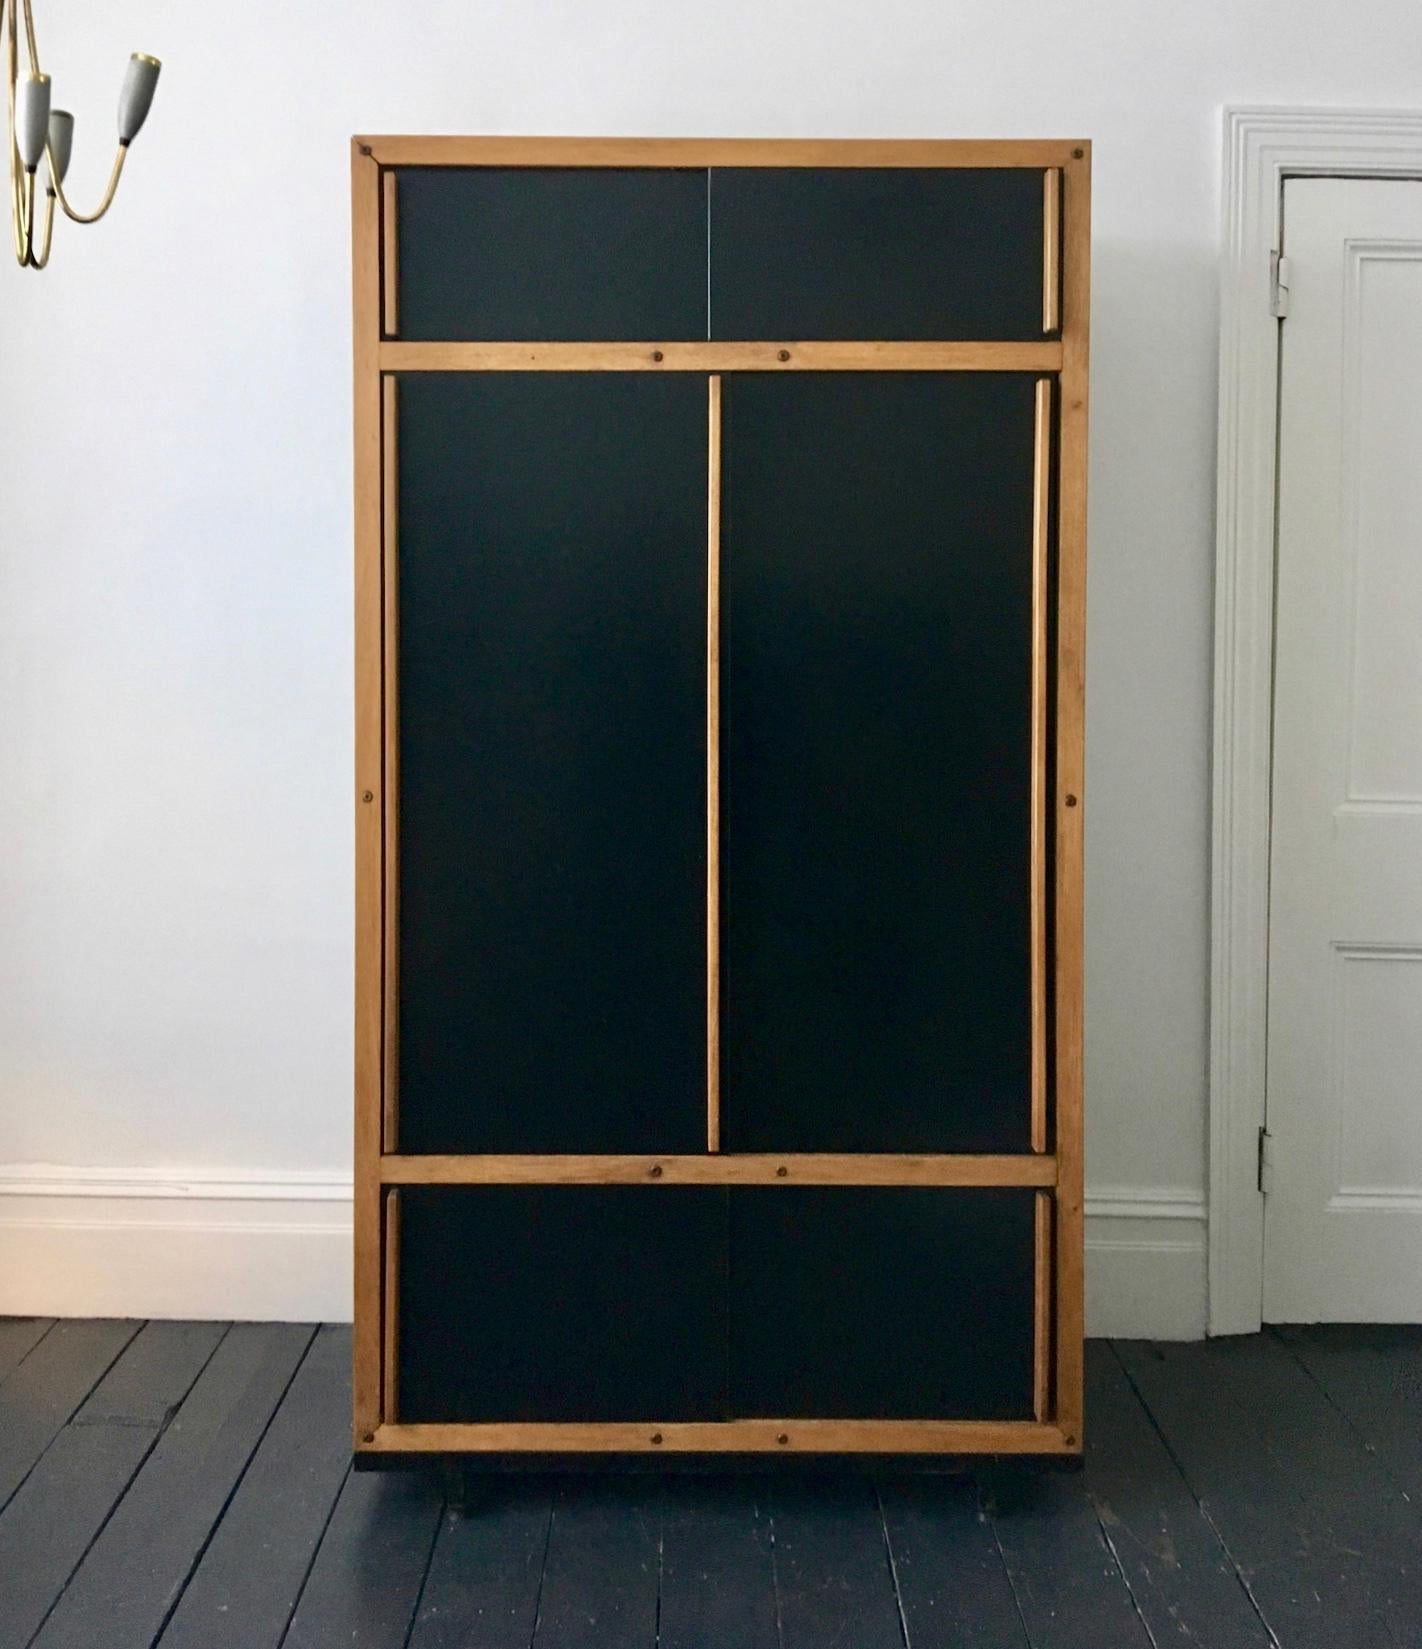 *** Late Summer Sale - ends 30 August ***

Modernist cabinet or armoire by André Sornay, mid-20th century, France. A simple design of clean lines, the main black panels being outlined by the natural wood of the frame and handles of the sliding